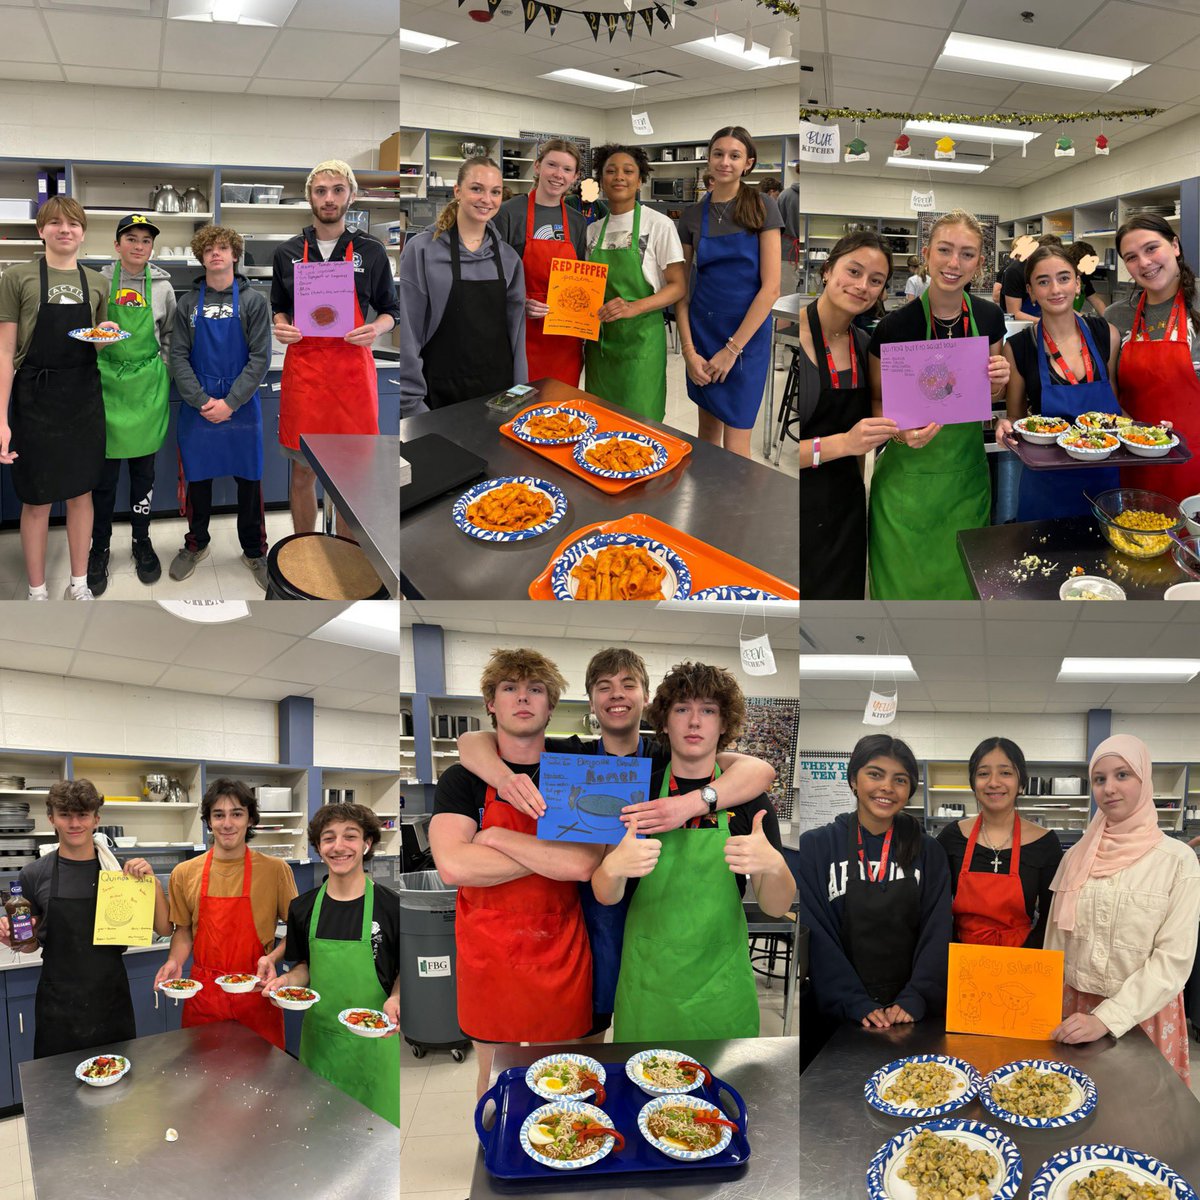 It was a super fun day of competition in the culinary room today! Culinary 1 Ss presented their Greatest Grains dishes to staff & student judges and showcased tons of creativity. They all spun for random ingredients which challenged them to think outside the box! #Empower95